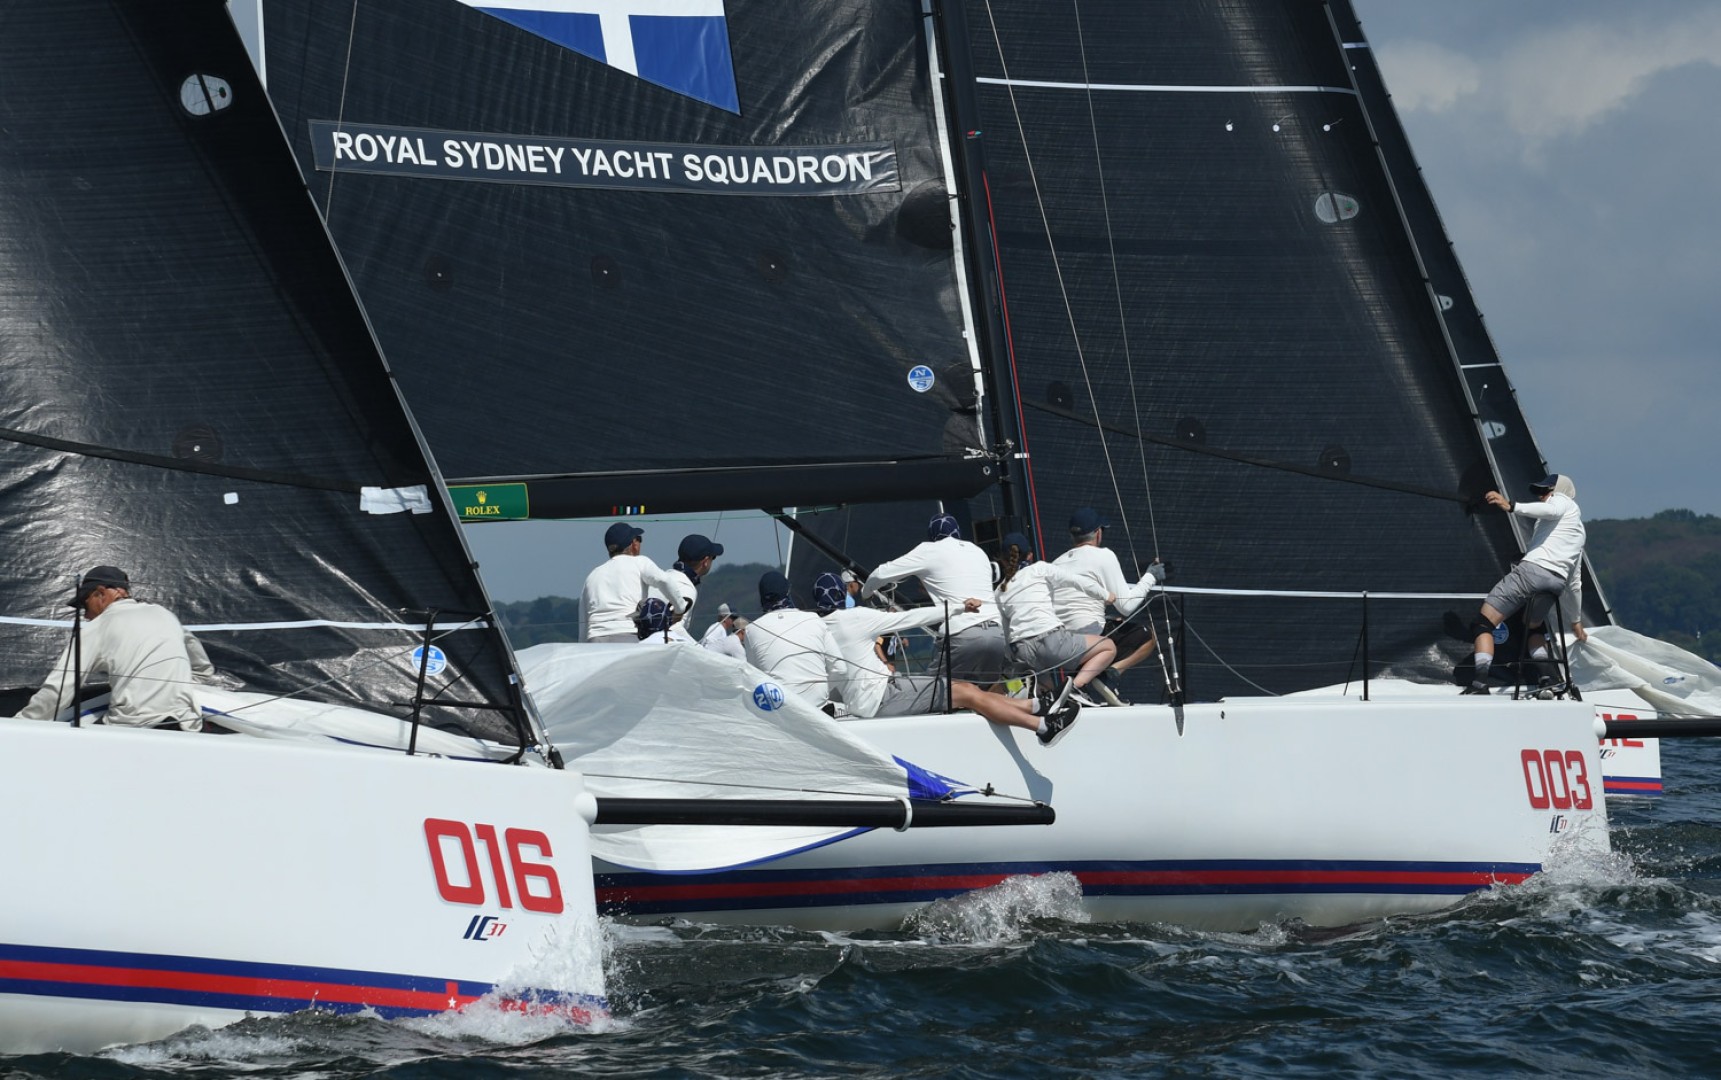 Dual Defending Champs Prepare for Eighth Edition of Corinthian Sailing Classic